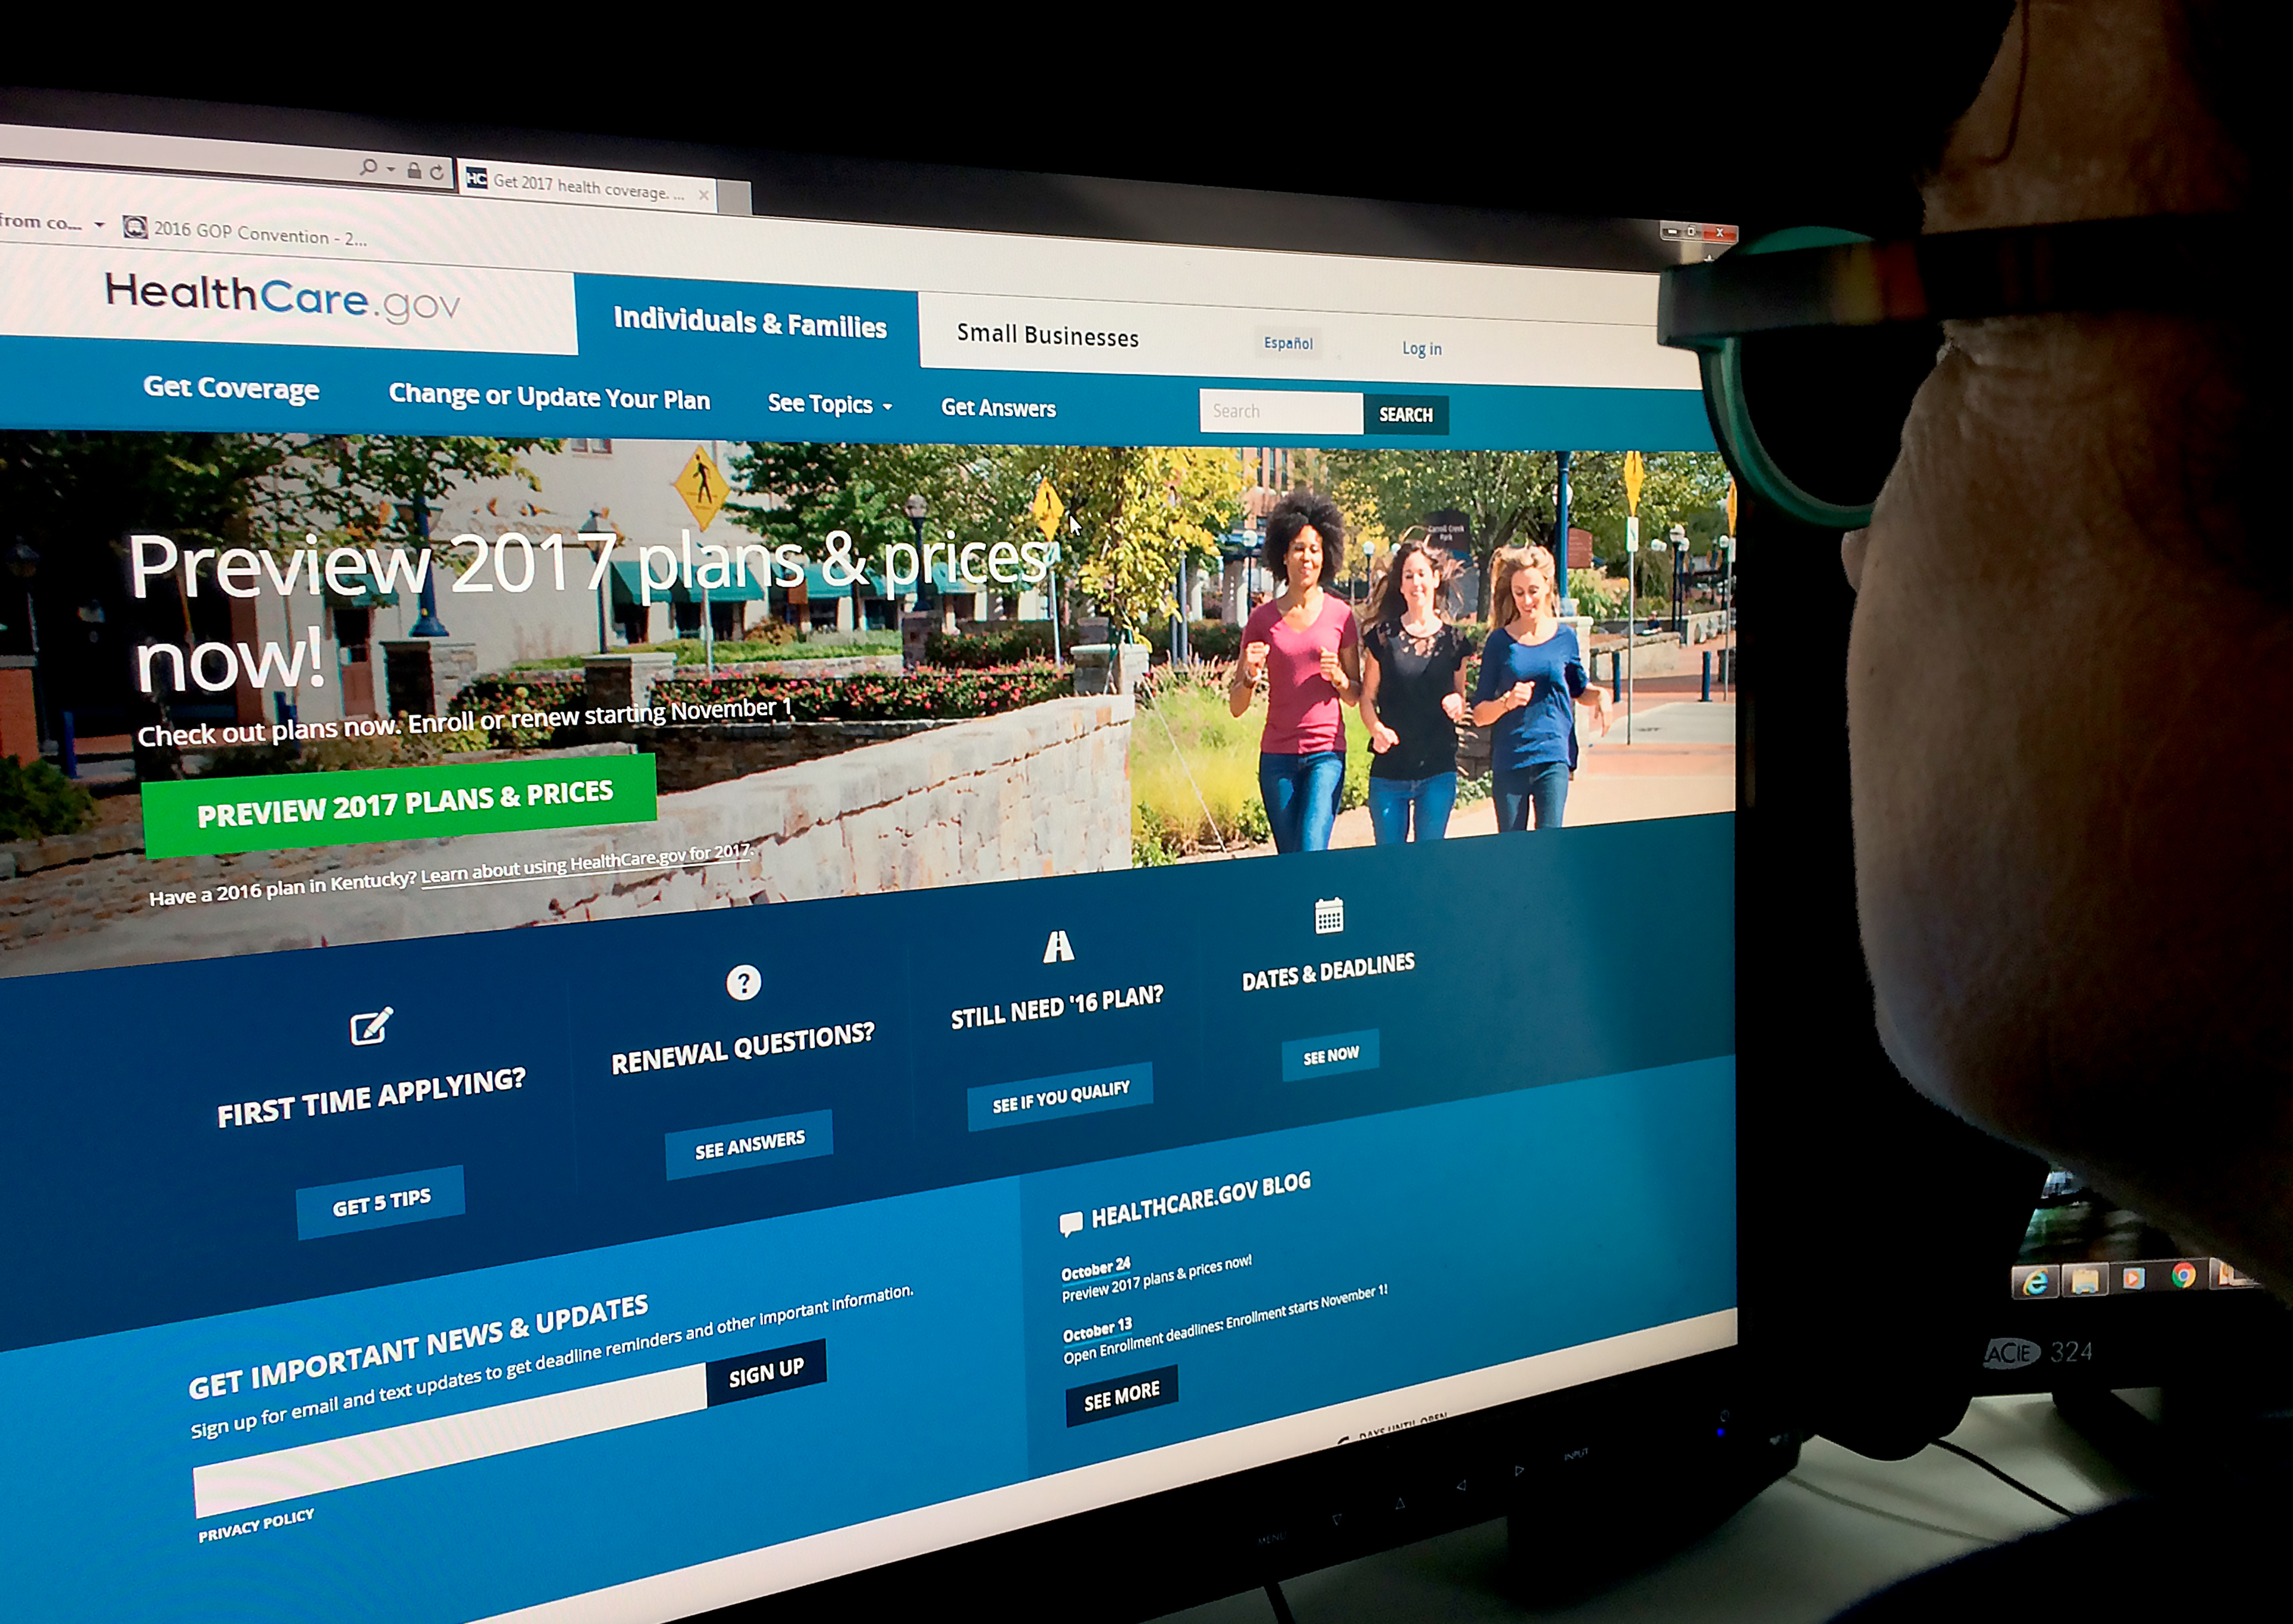 obamacare record signups day after election donald trump